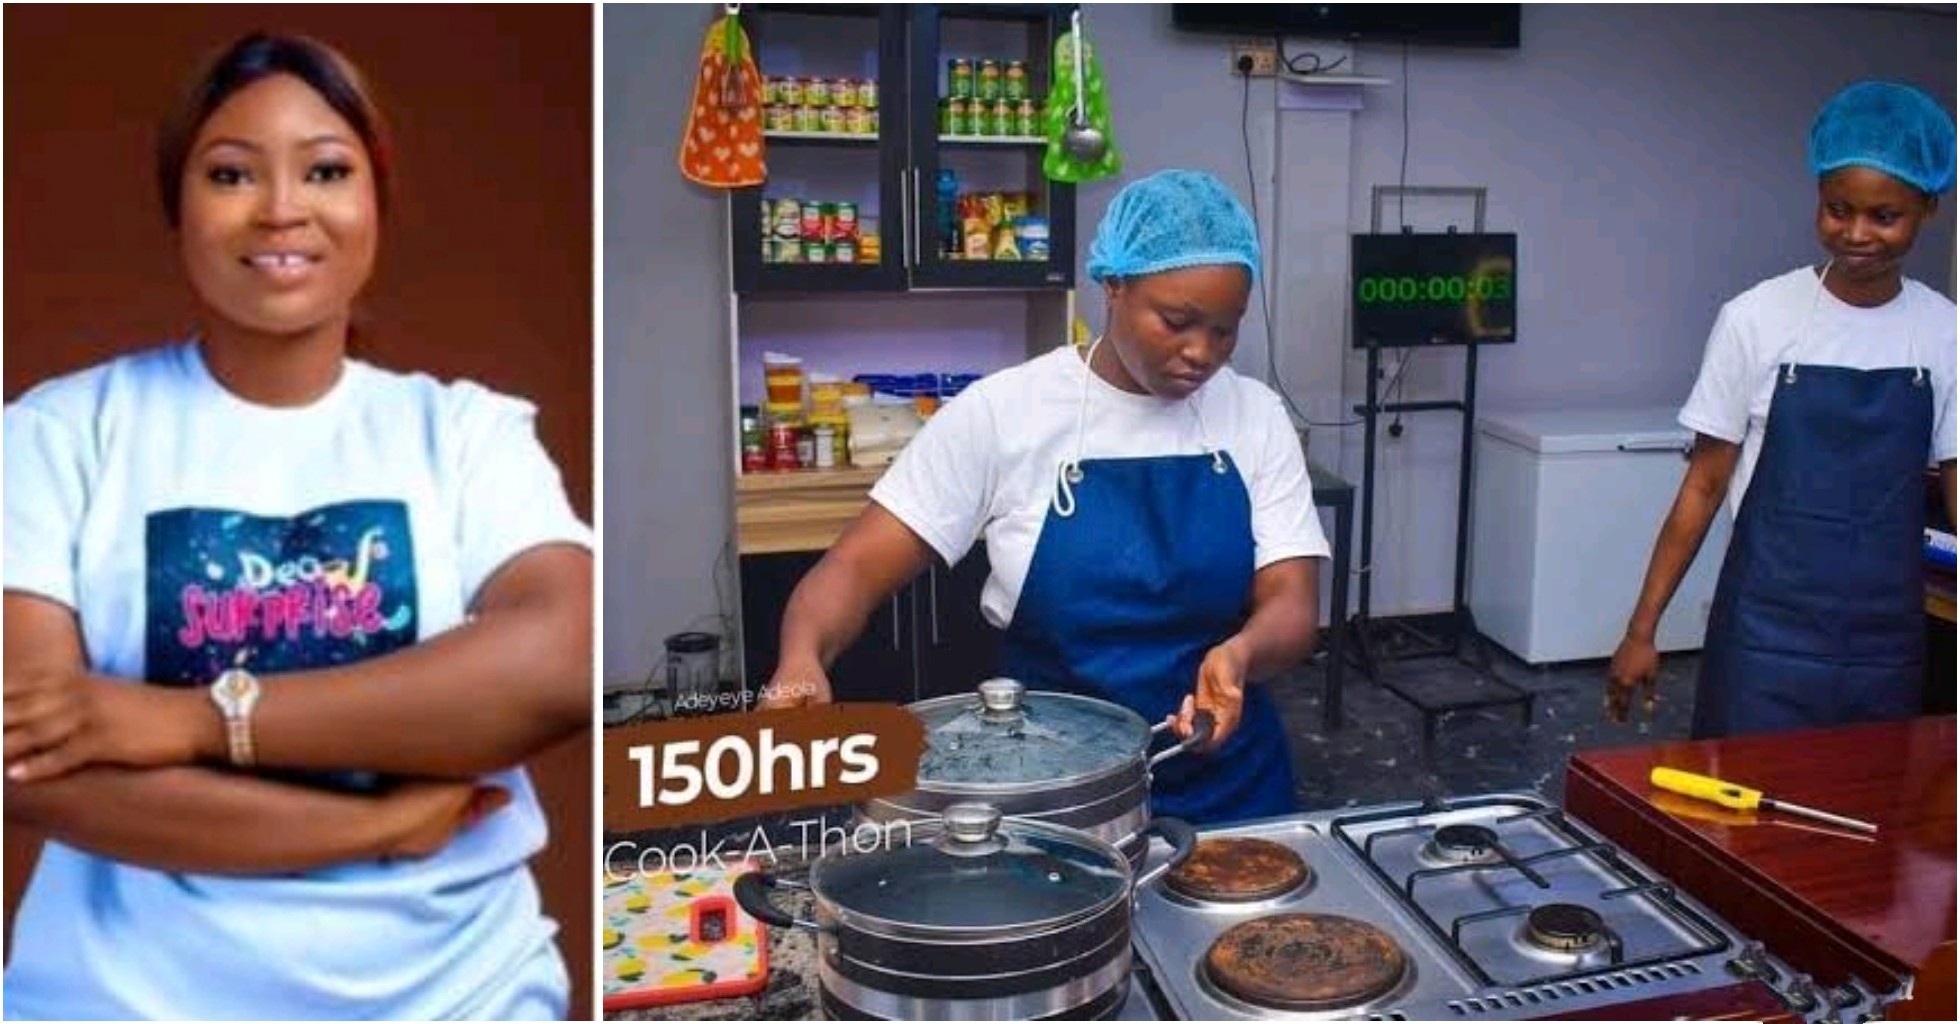 Ondo chef, Adeoye reveals Guinness world record’s stance on her 150-hour cook-a-thon